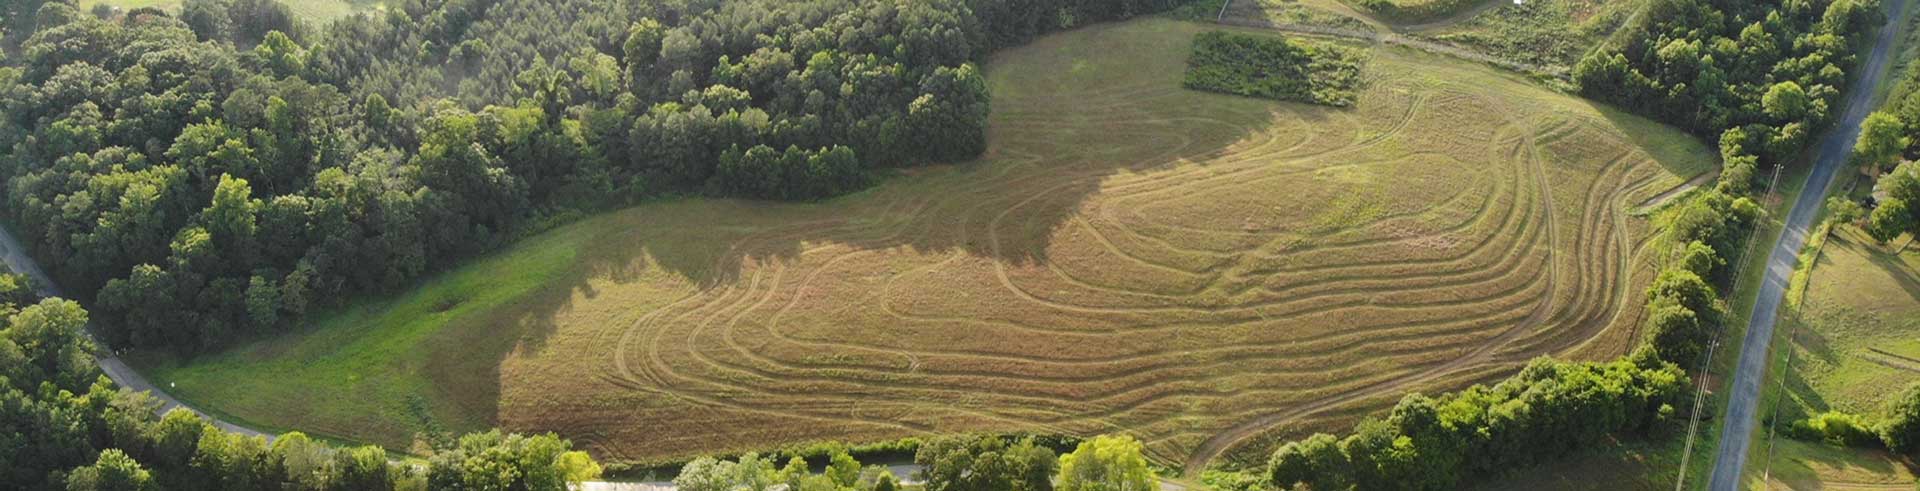 Areal photo of a field